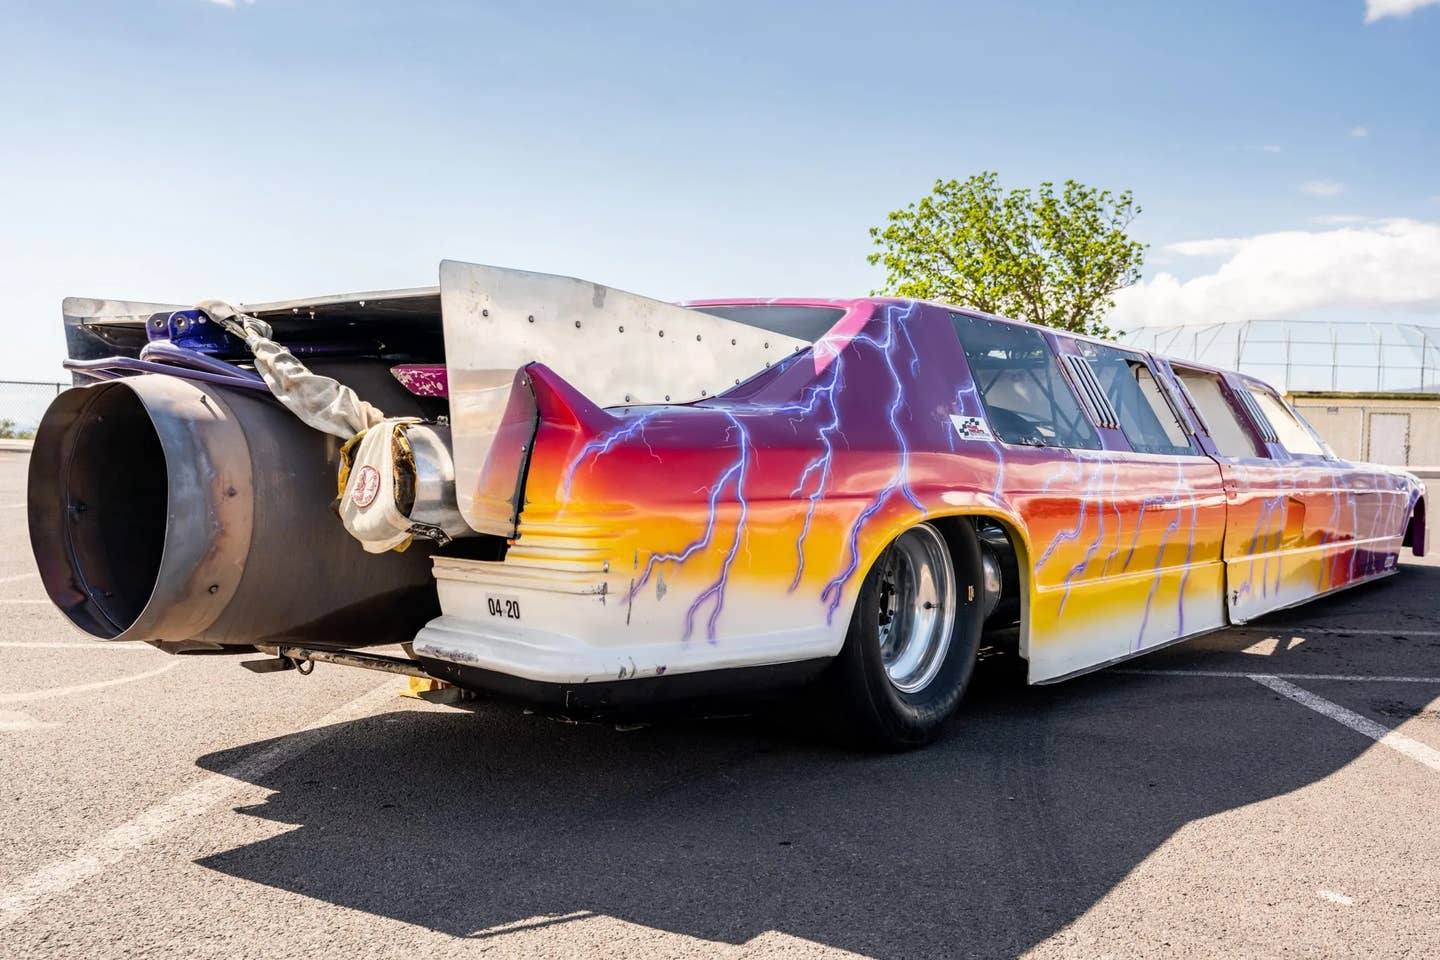 Mercedes S-Class jet-powered limo